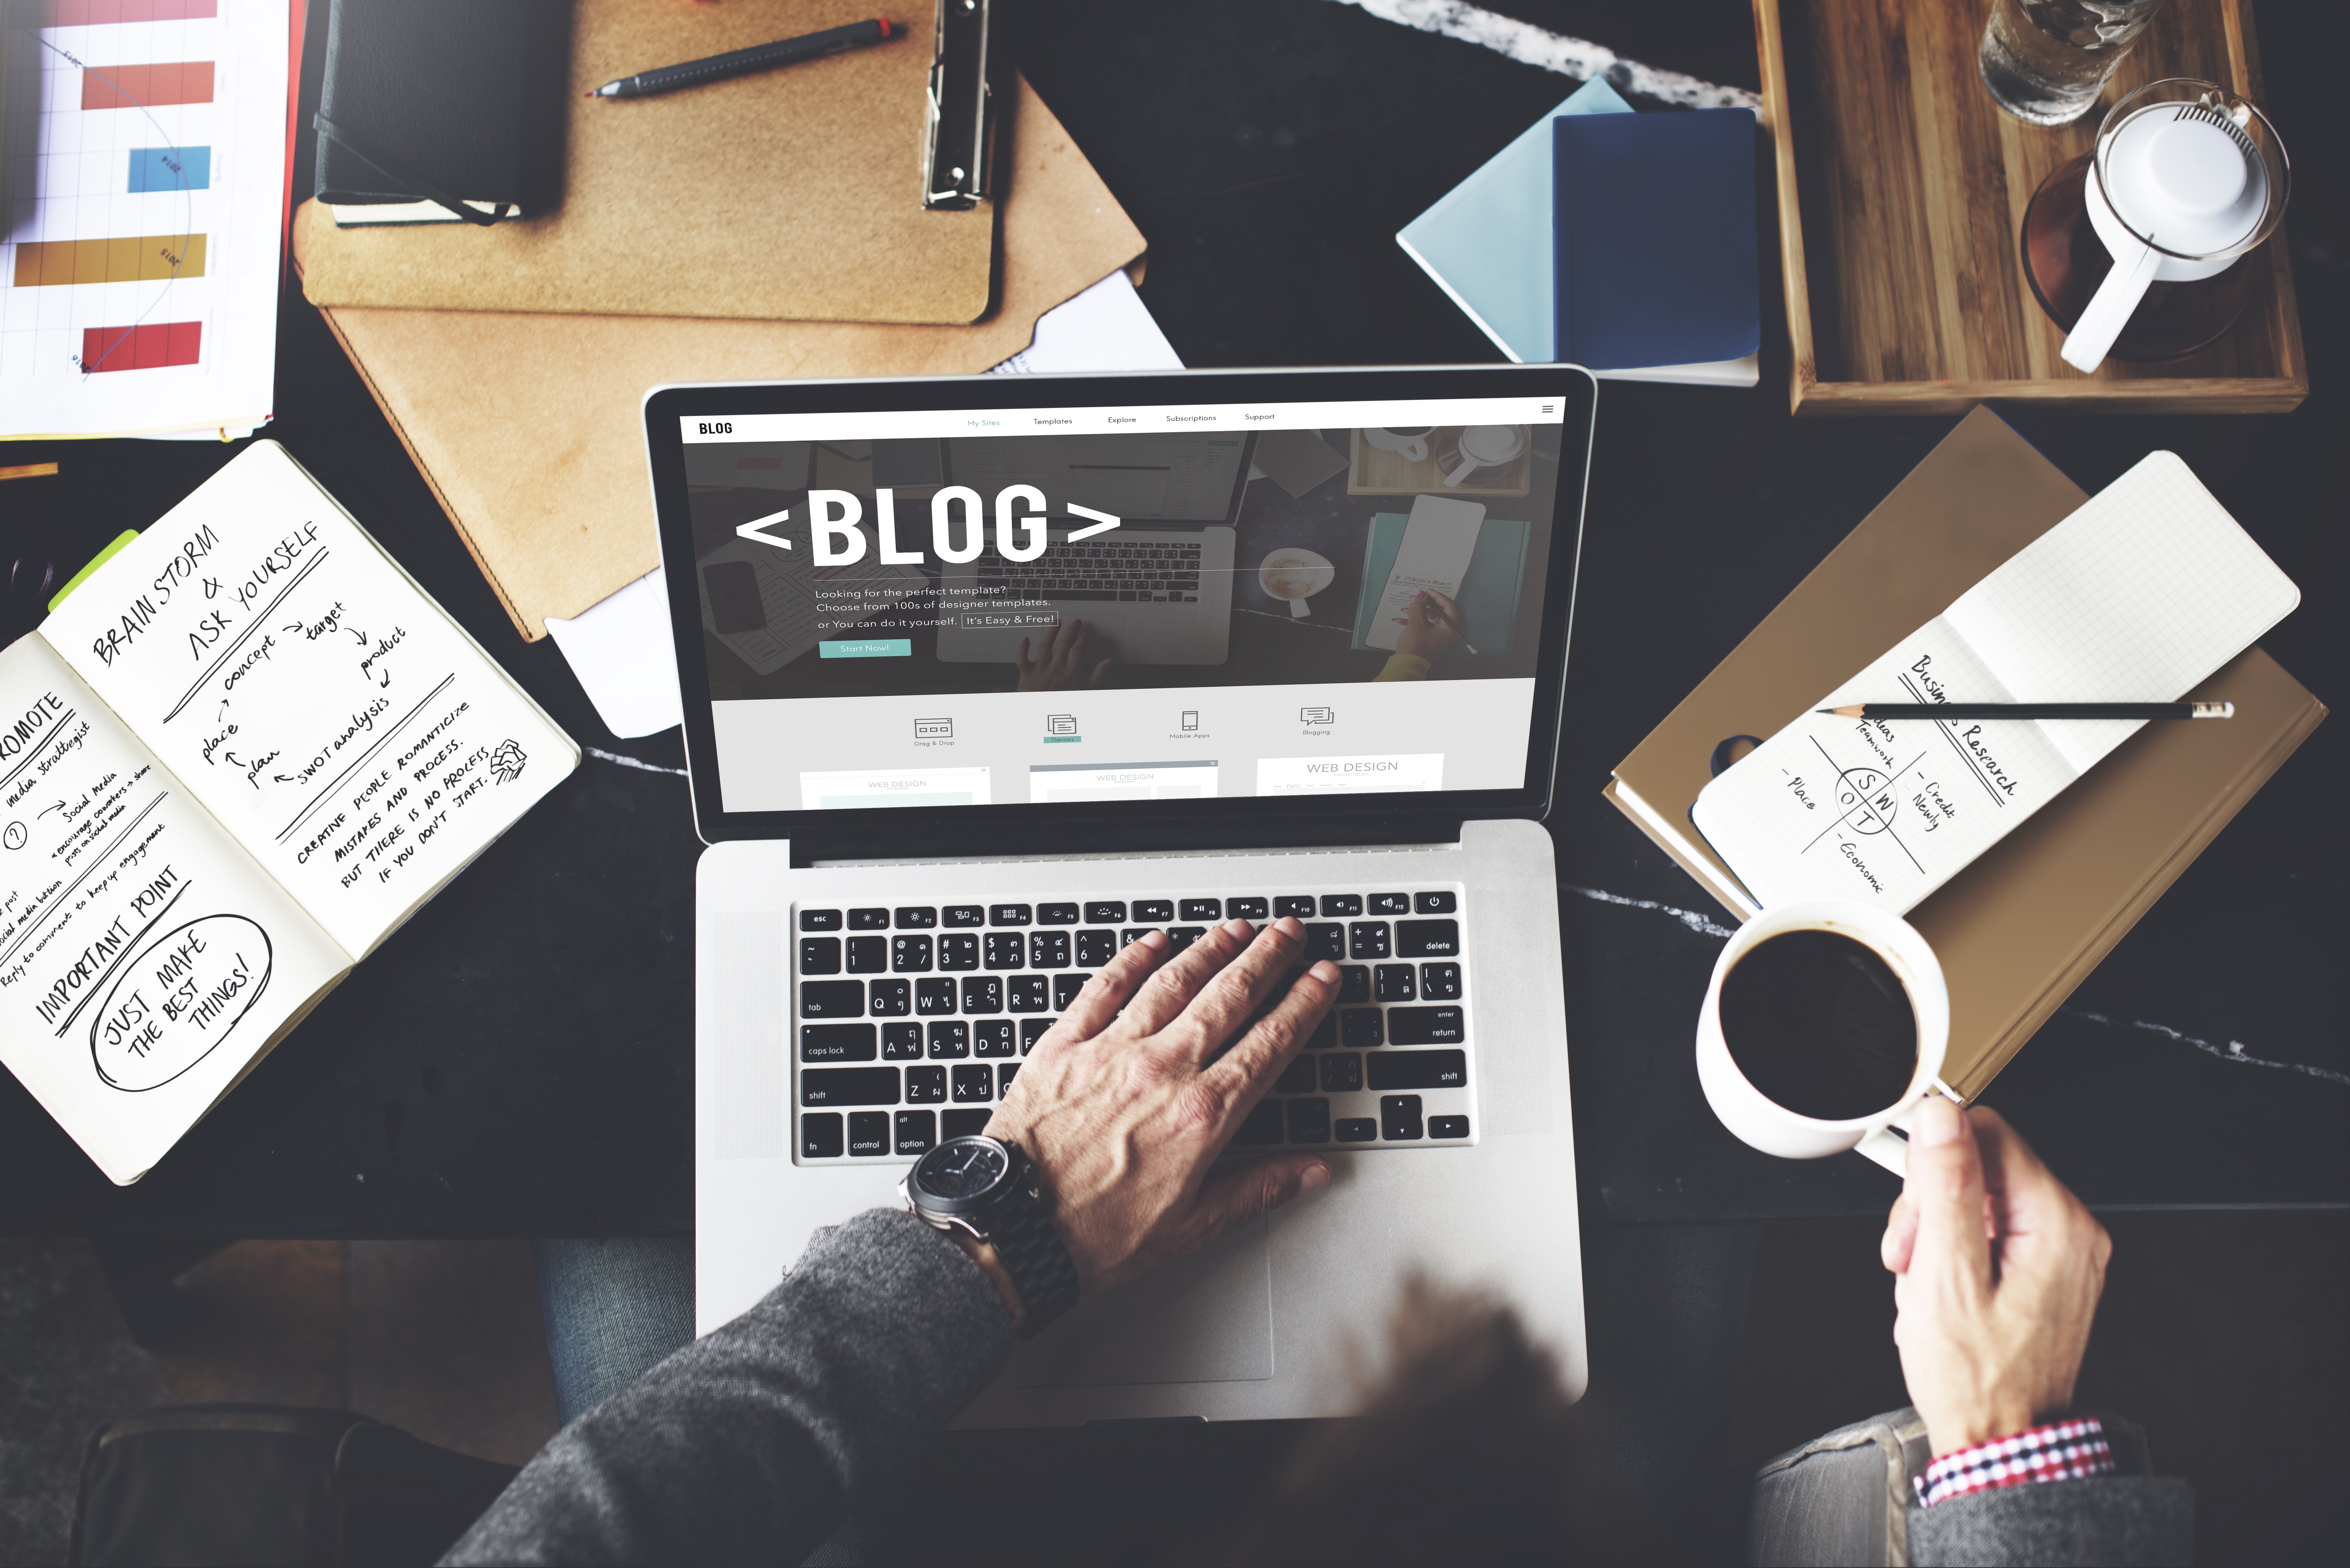 Exactly How Important is Consistency to Your Blogging Strategy?